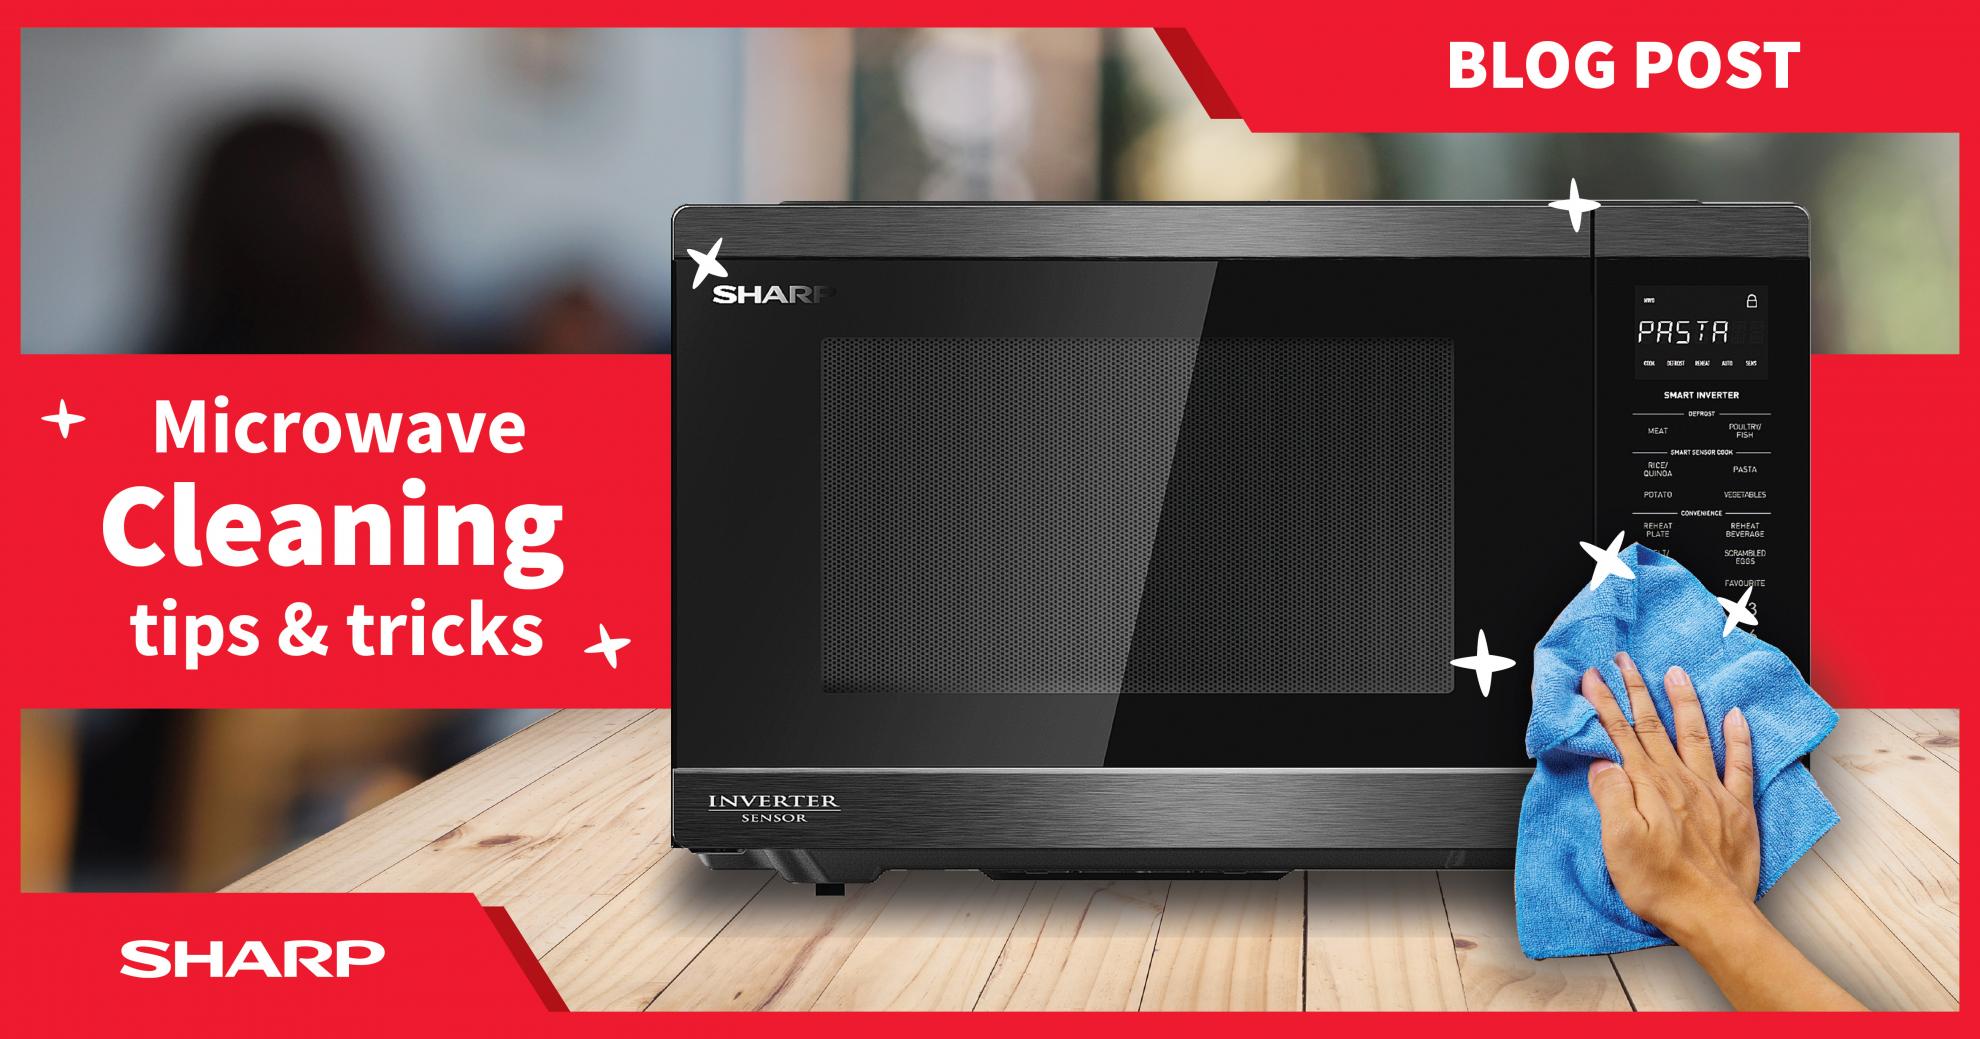 Keep your microwave clean with our handy tips